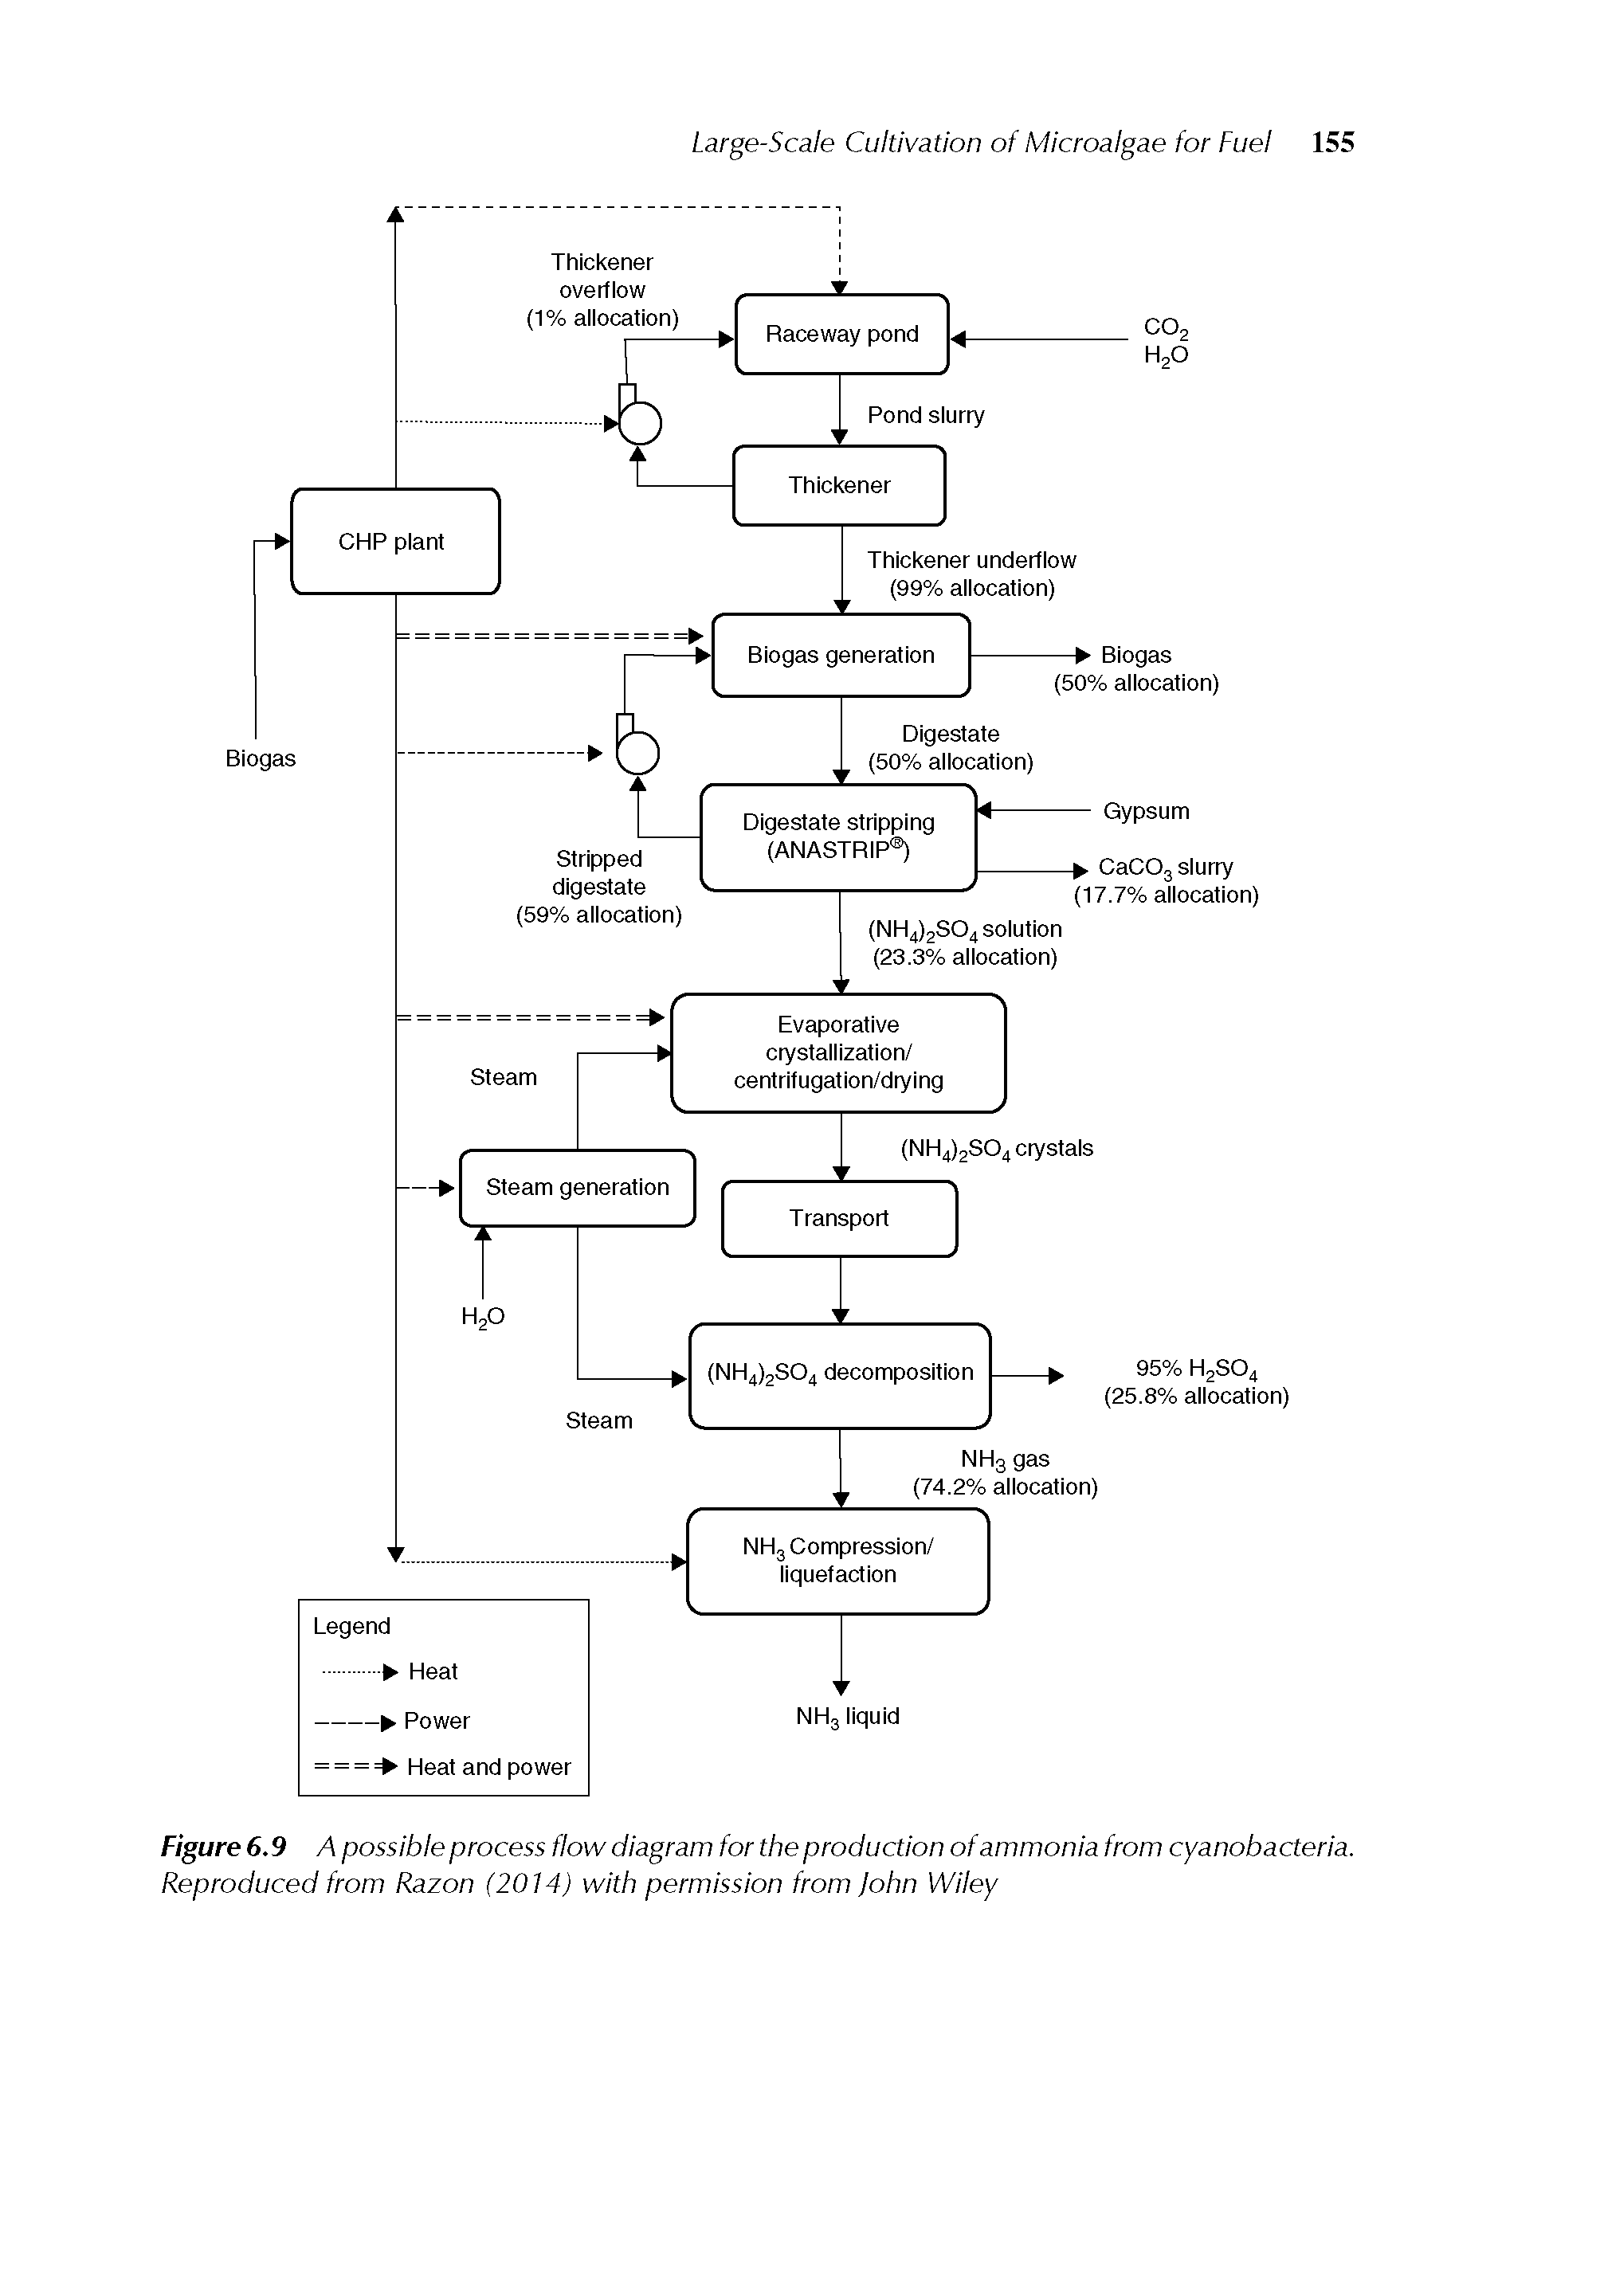 Figure 6.9 A possible process flow diagram for the production of ammonia from cyanobacteria. Reproduced from Razon (2014) with permission from John Wiley...